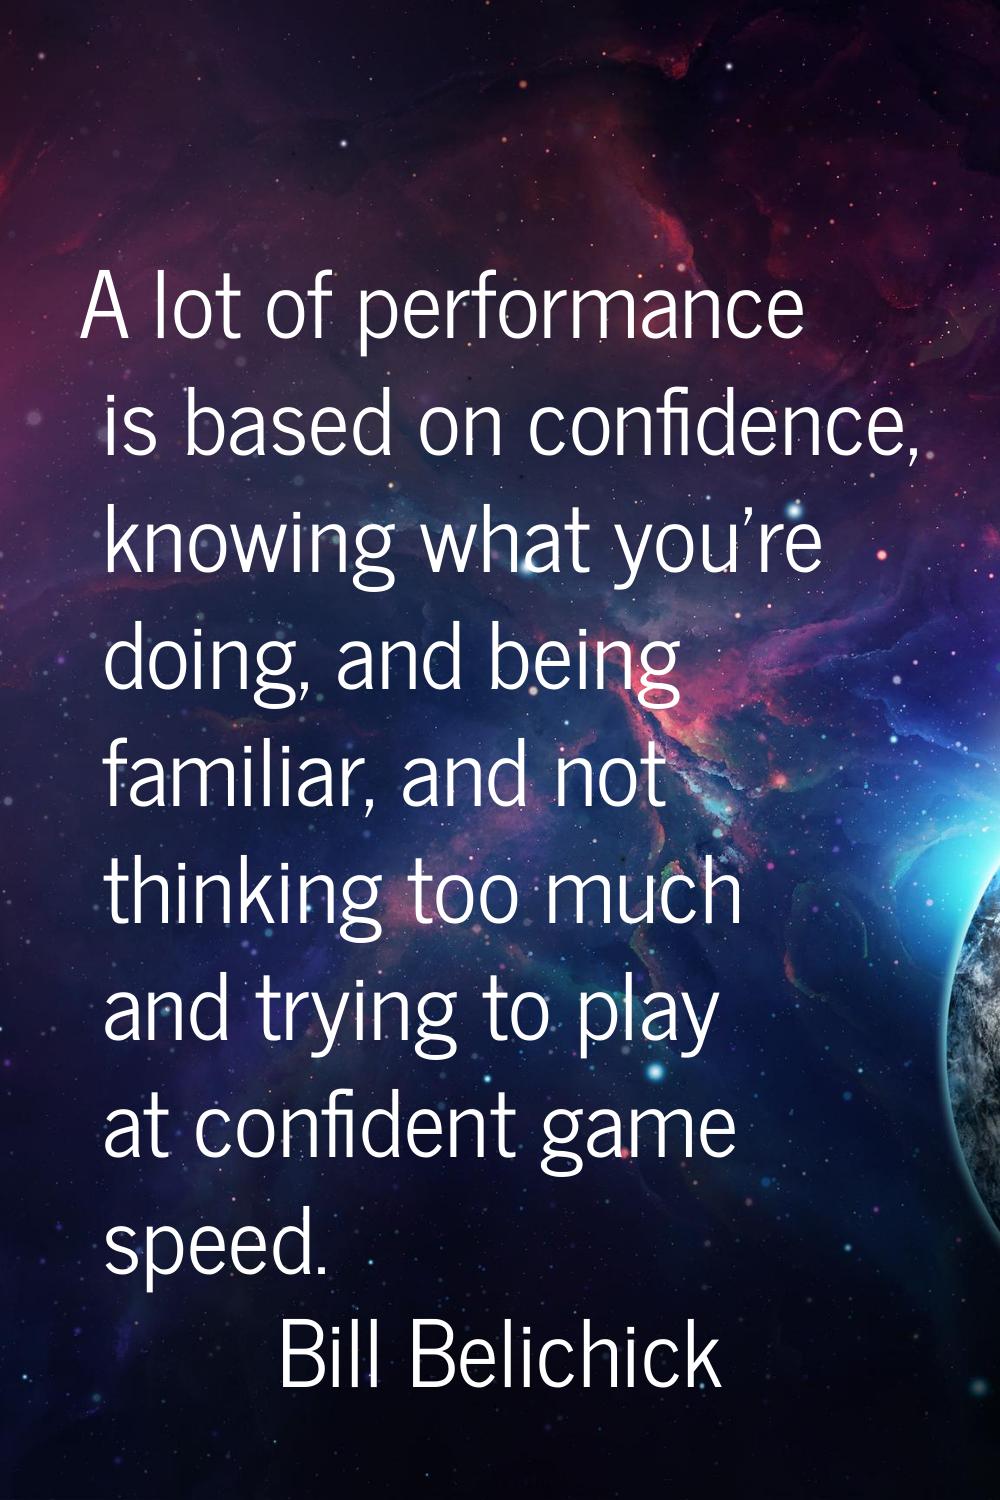 A lot of performance is based on confidence, knowing what you're doing, and being familiar, and not